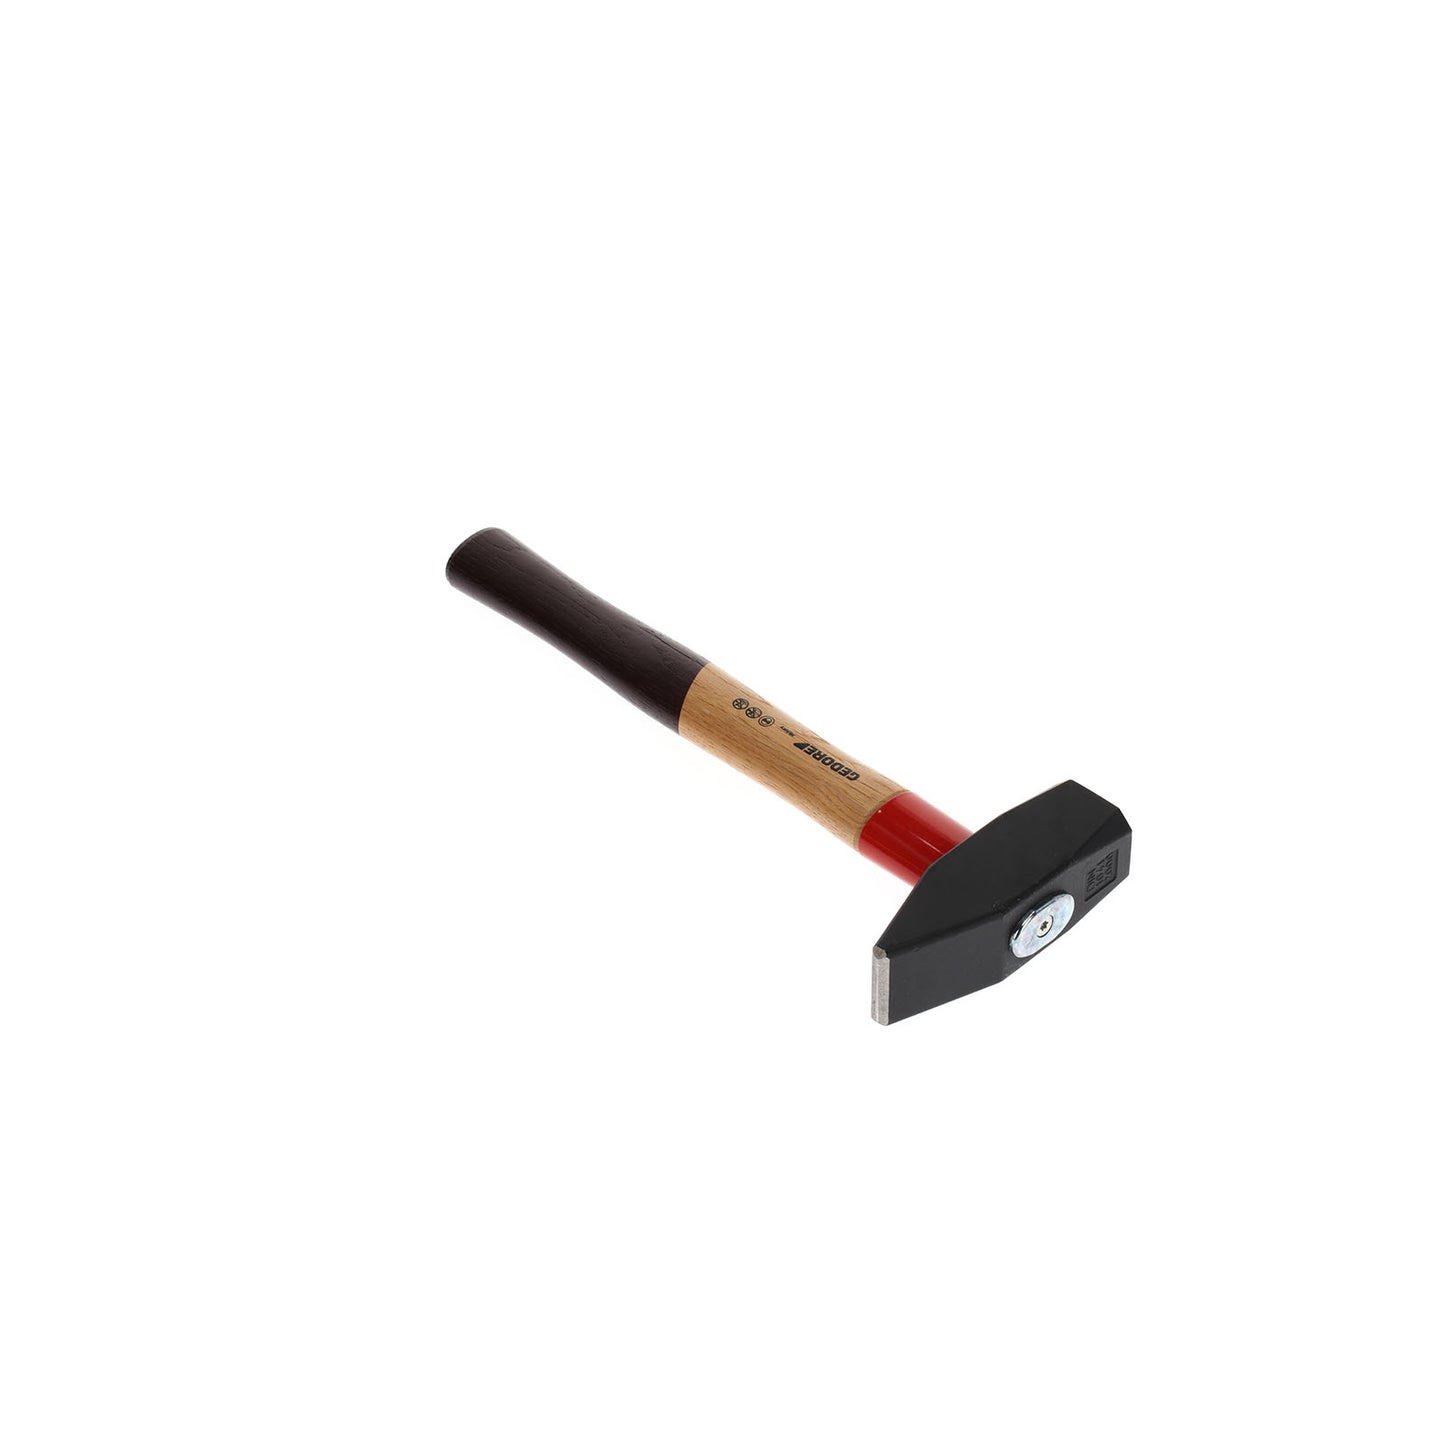 GEDORE 600 H-2000 - ROTBAND assembly hammer 2kg (8583820)